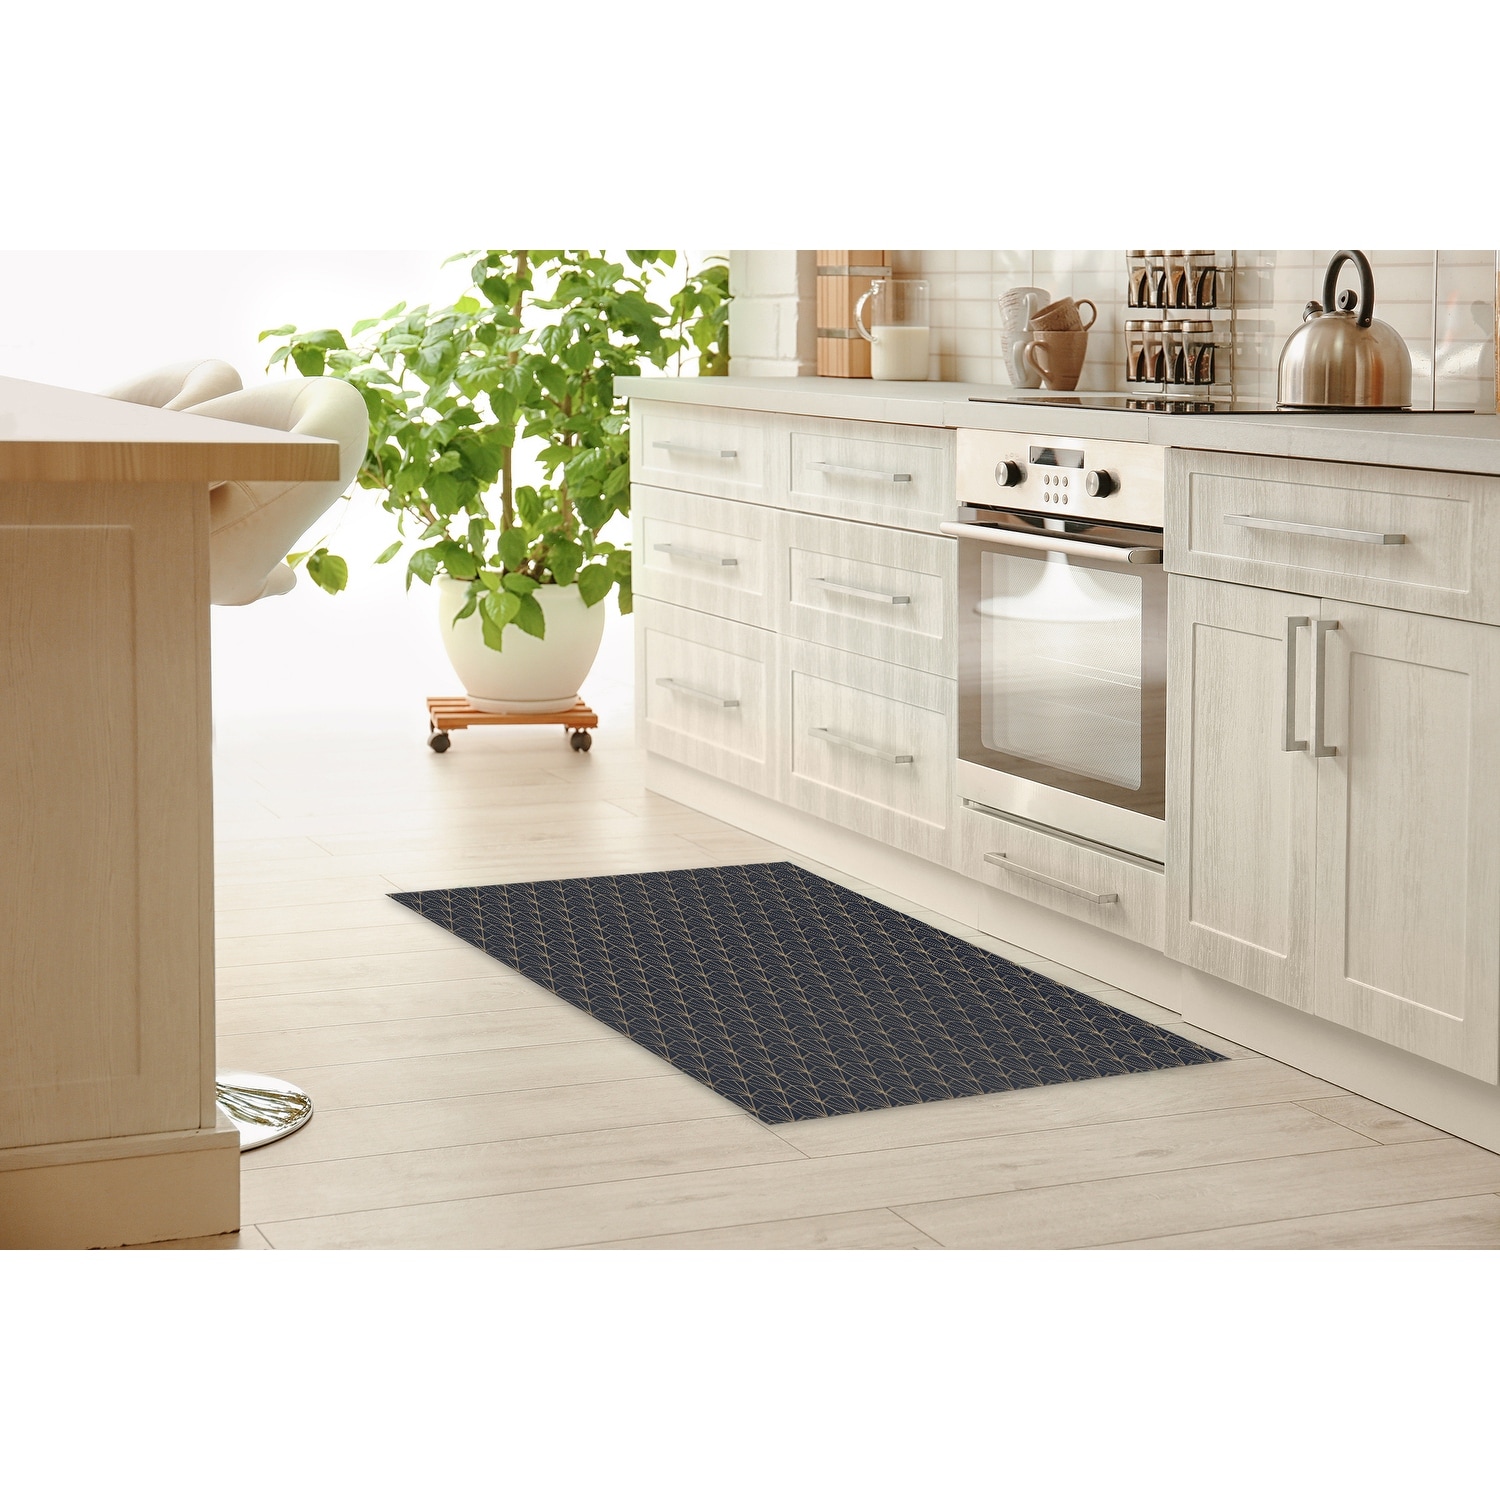 Gold White Kitchen Rugs Cushioned anti Fatigue 2 Piece Set Marble